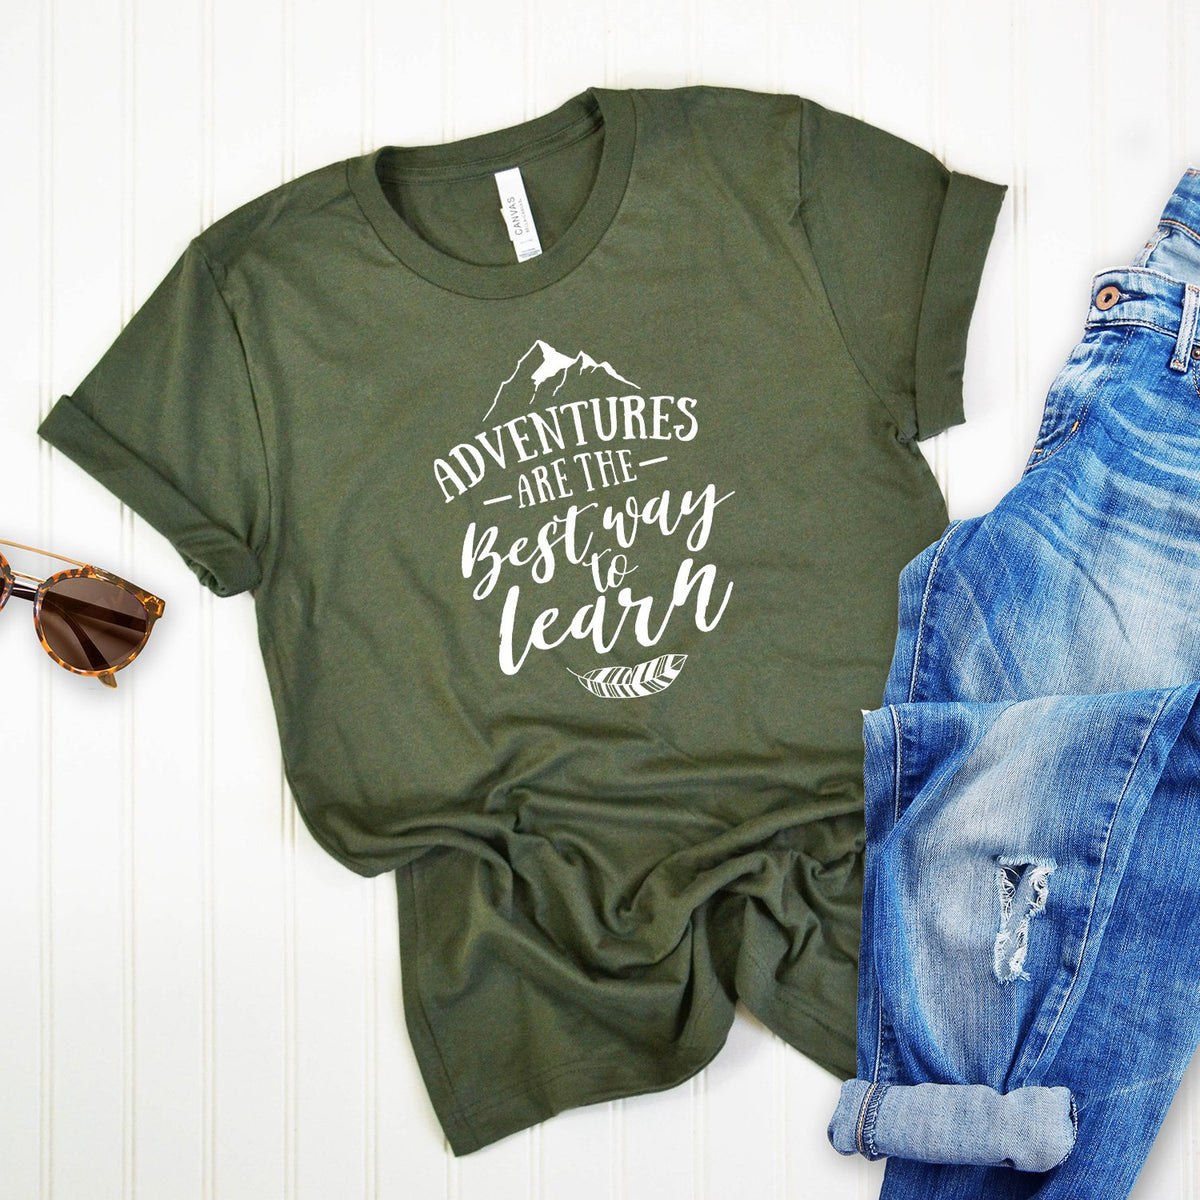 Adventures Are The Best Way to Learn - Short Sleeve Tee Shirt